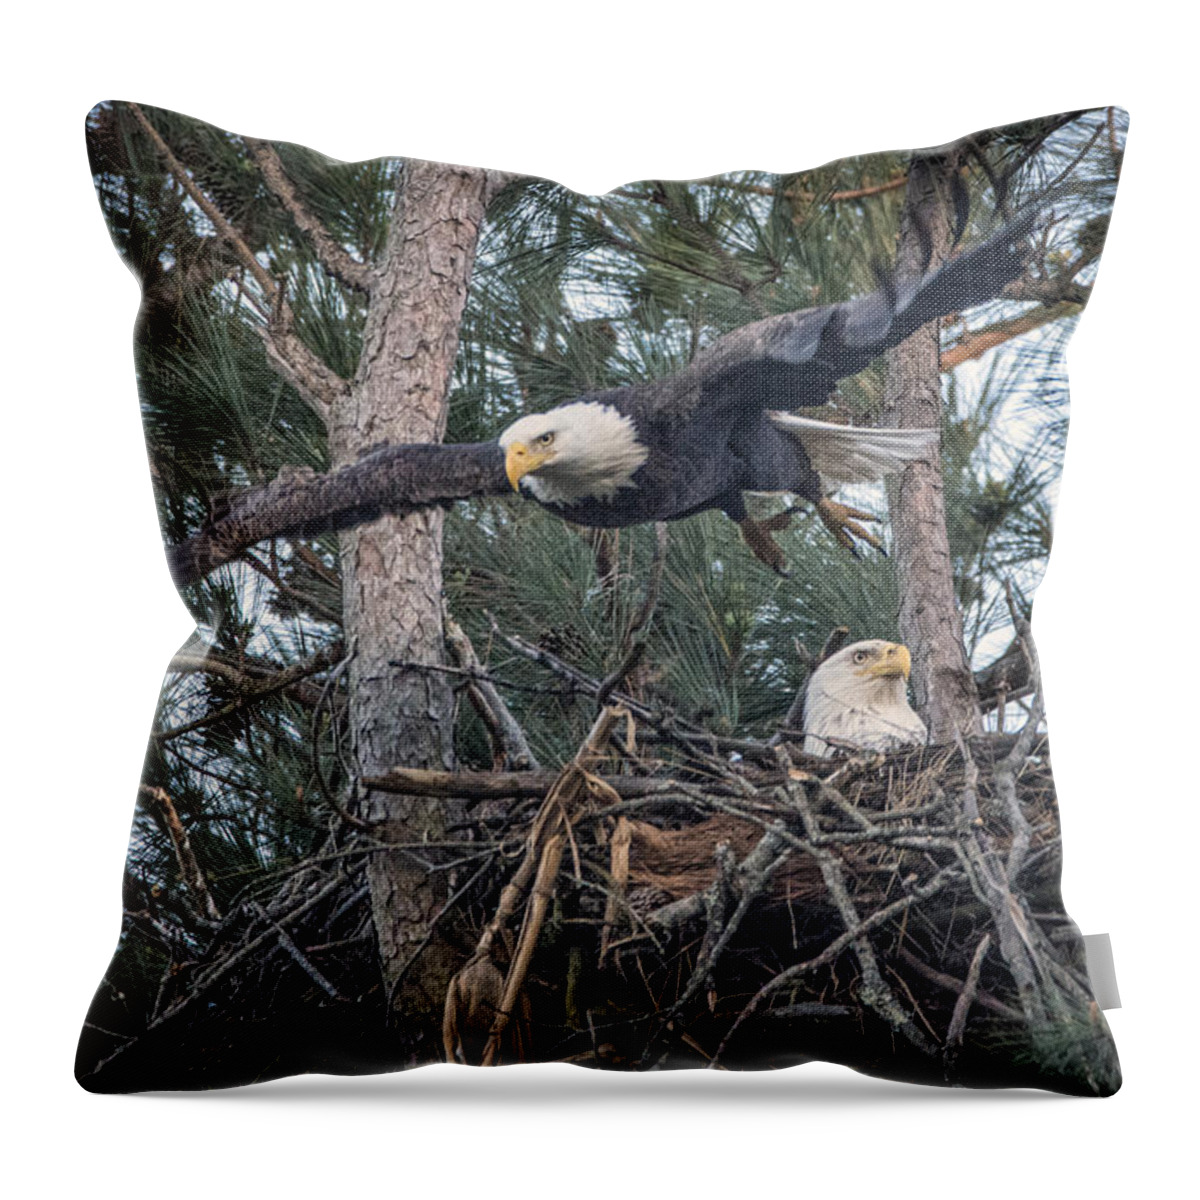 Animals Throw Pillow featuring the photograph March 25 2016 Gilbertsville Ky Eagle Flight by Jim Pearson